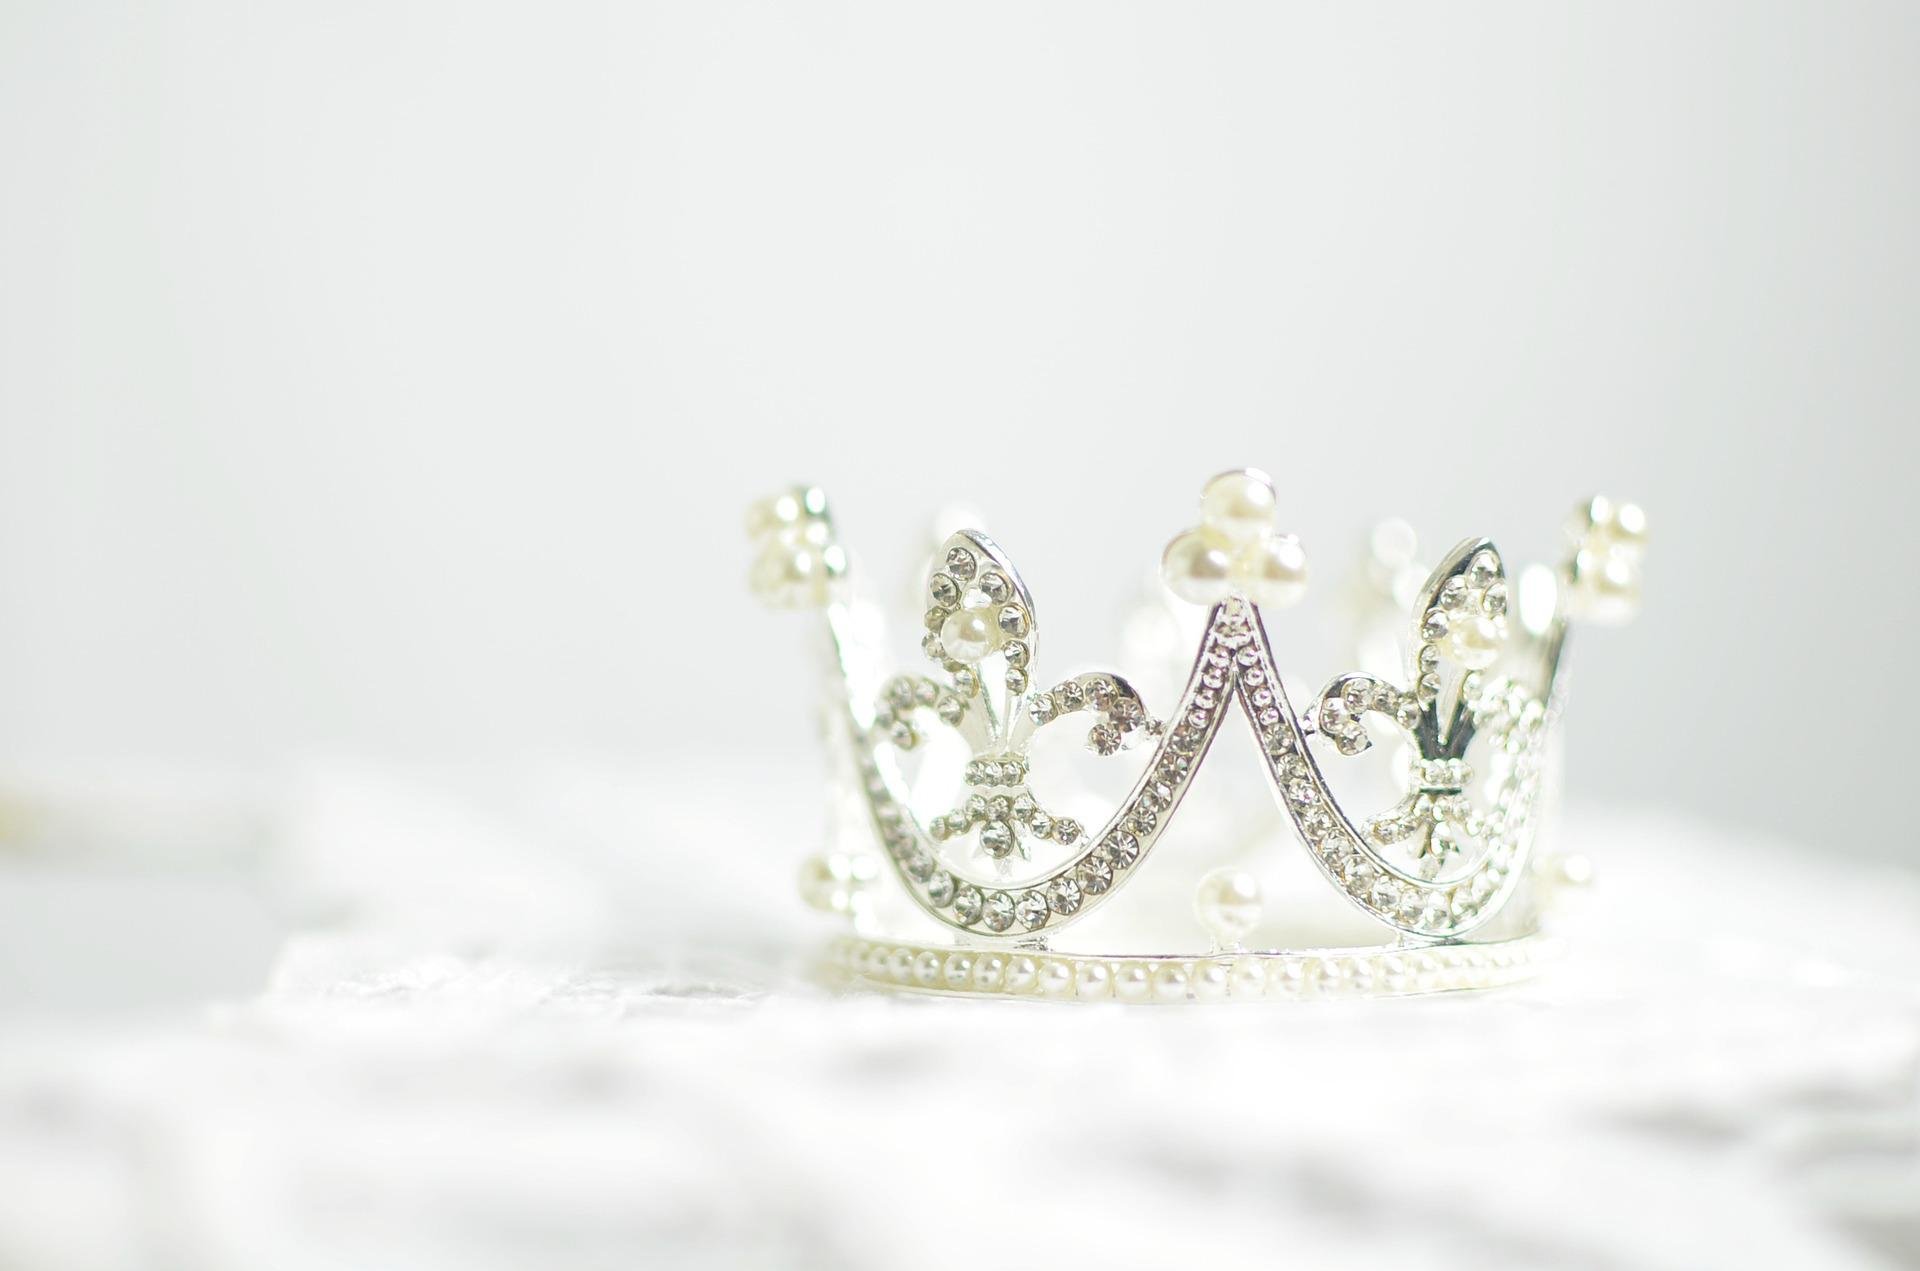 blog post main image of a silver colored crown on a white background